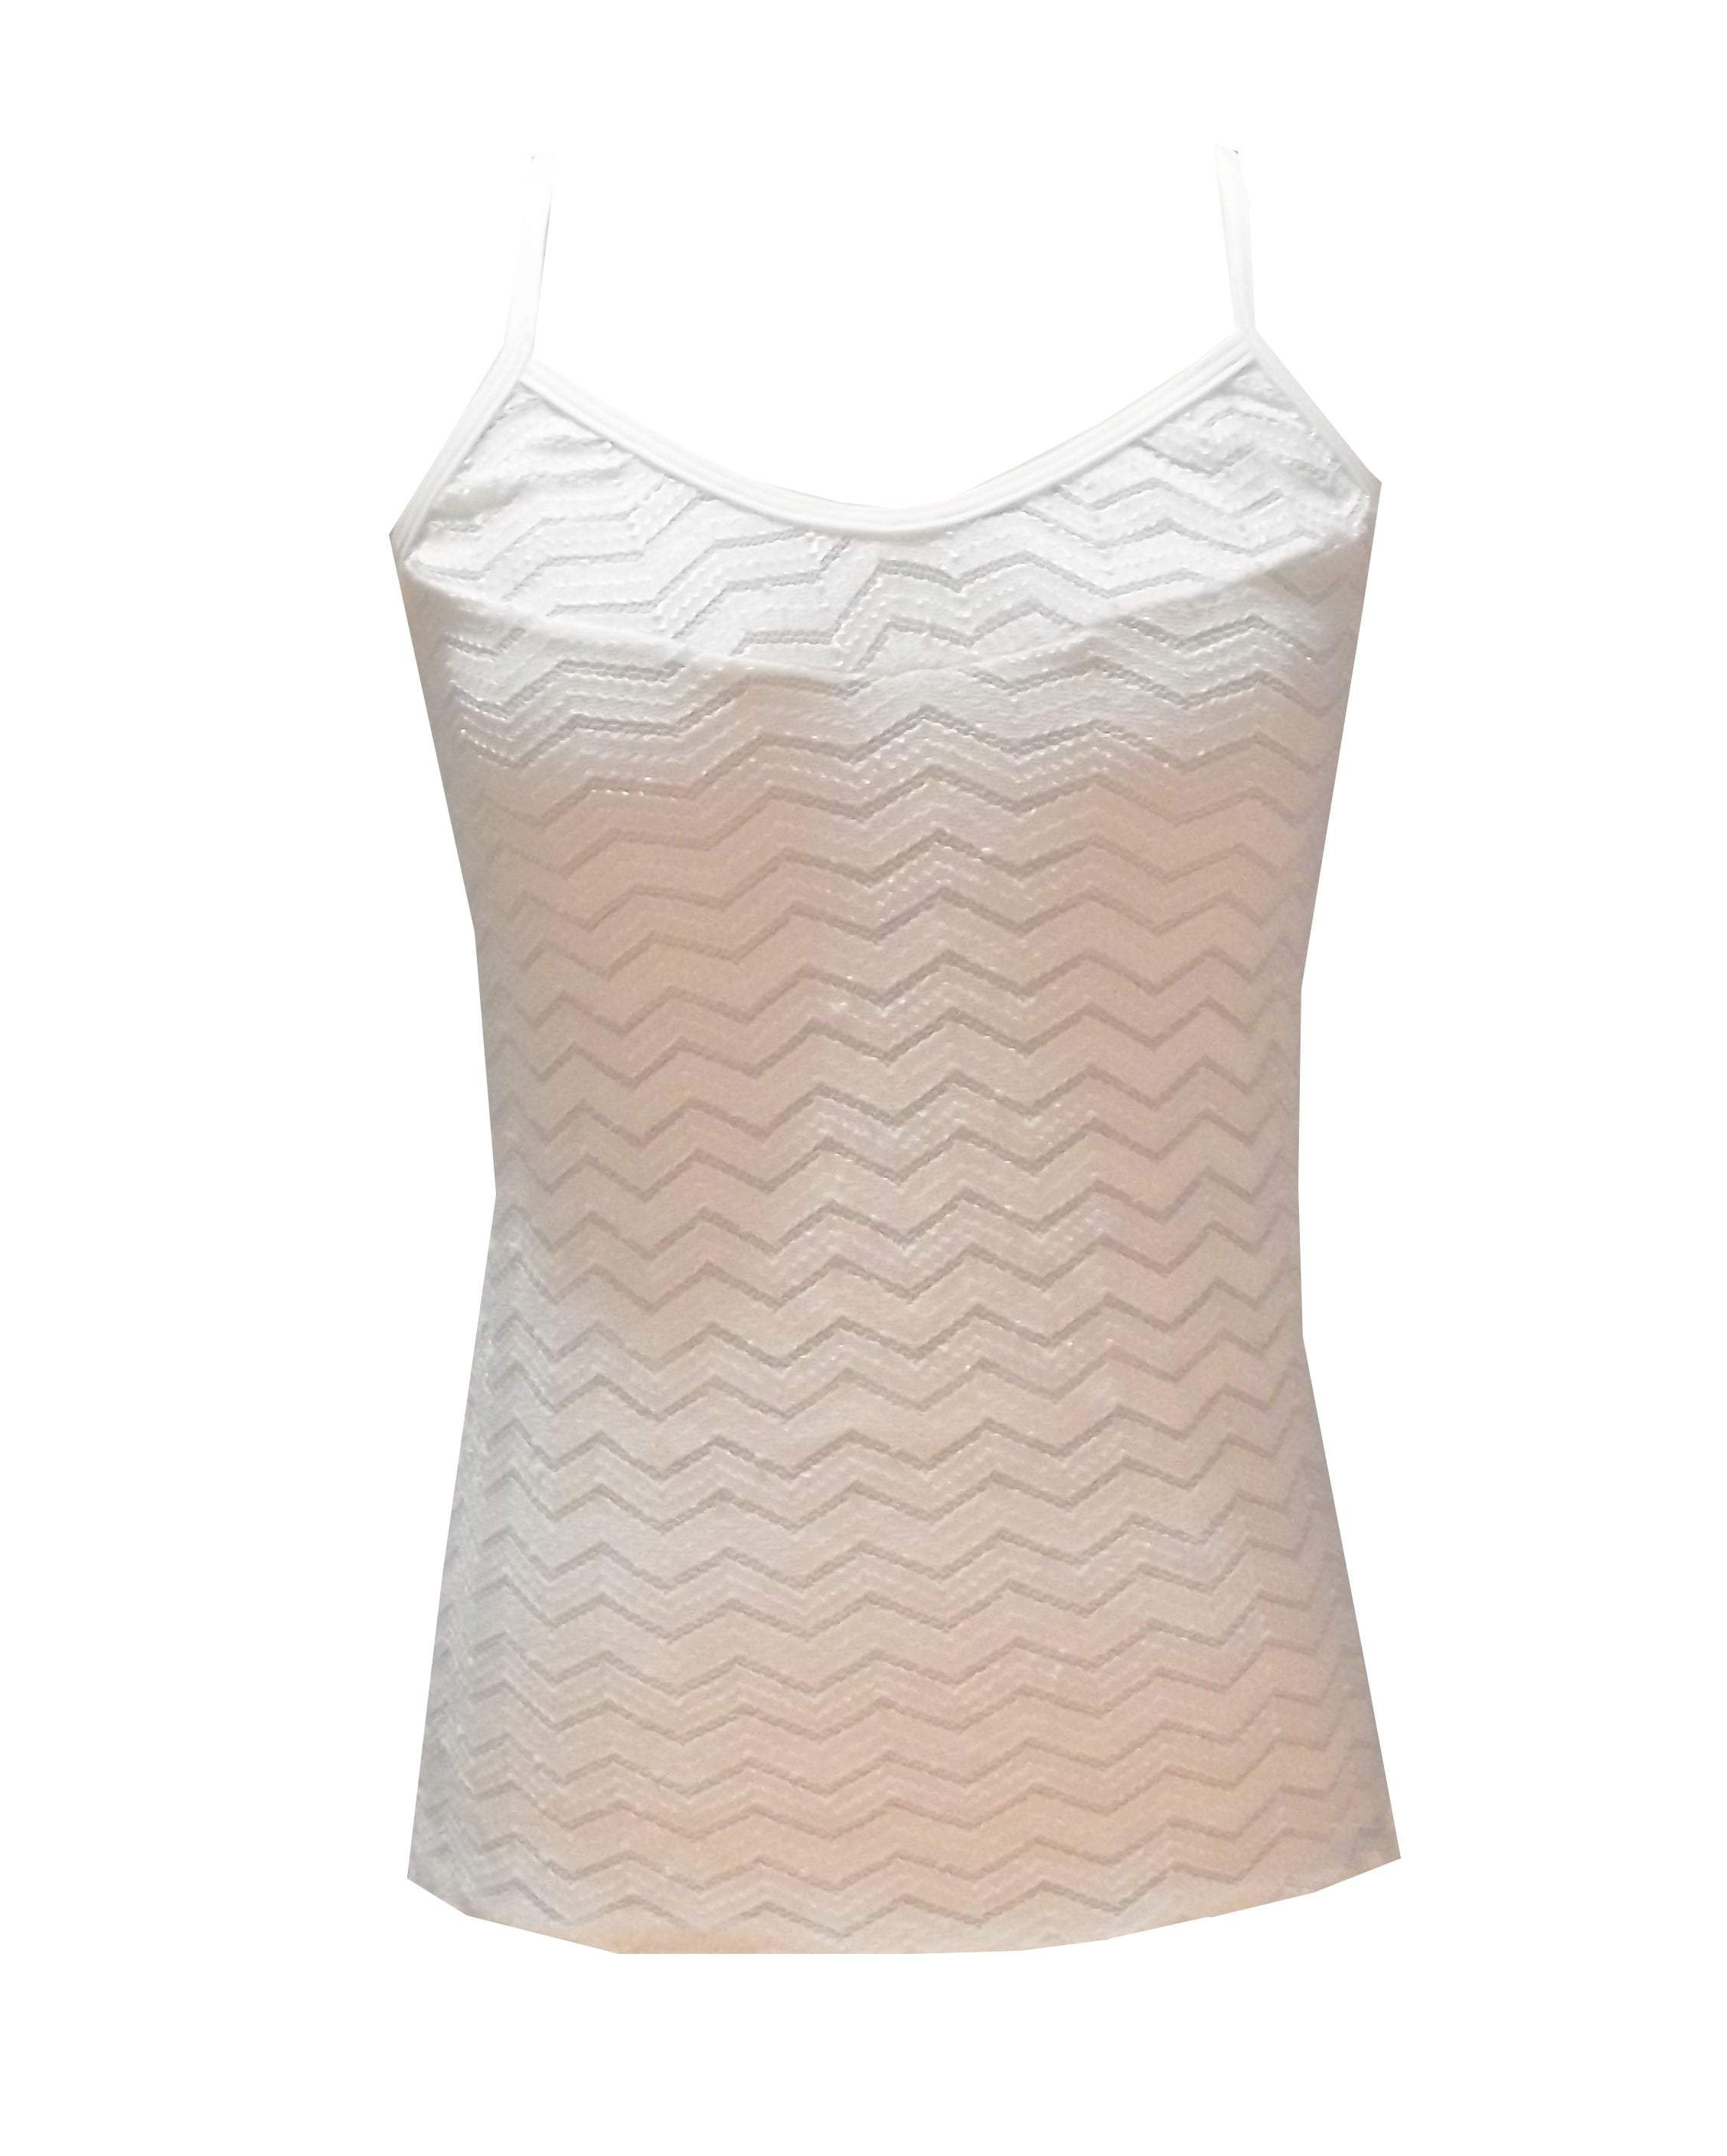 White Singlet Top in stretchy zig zag lace | Rhapso Designs | Be